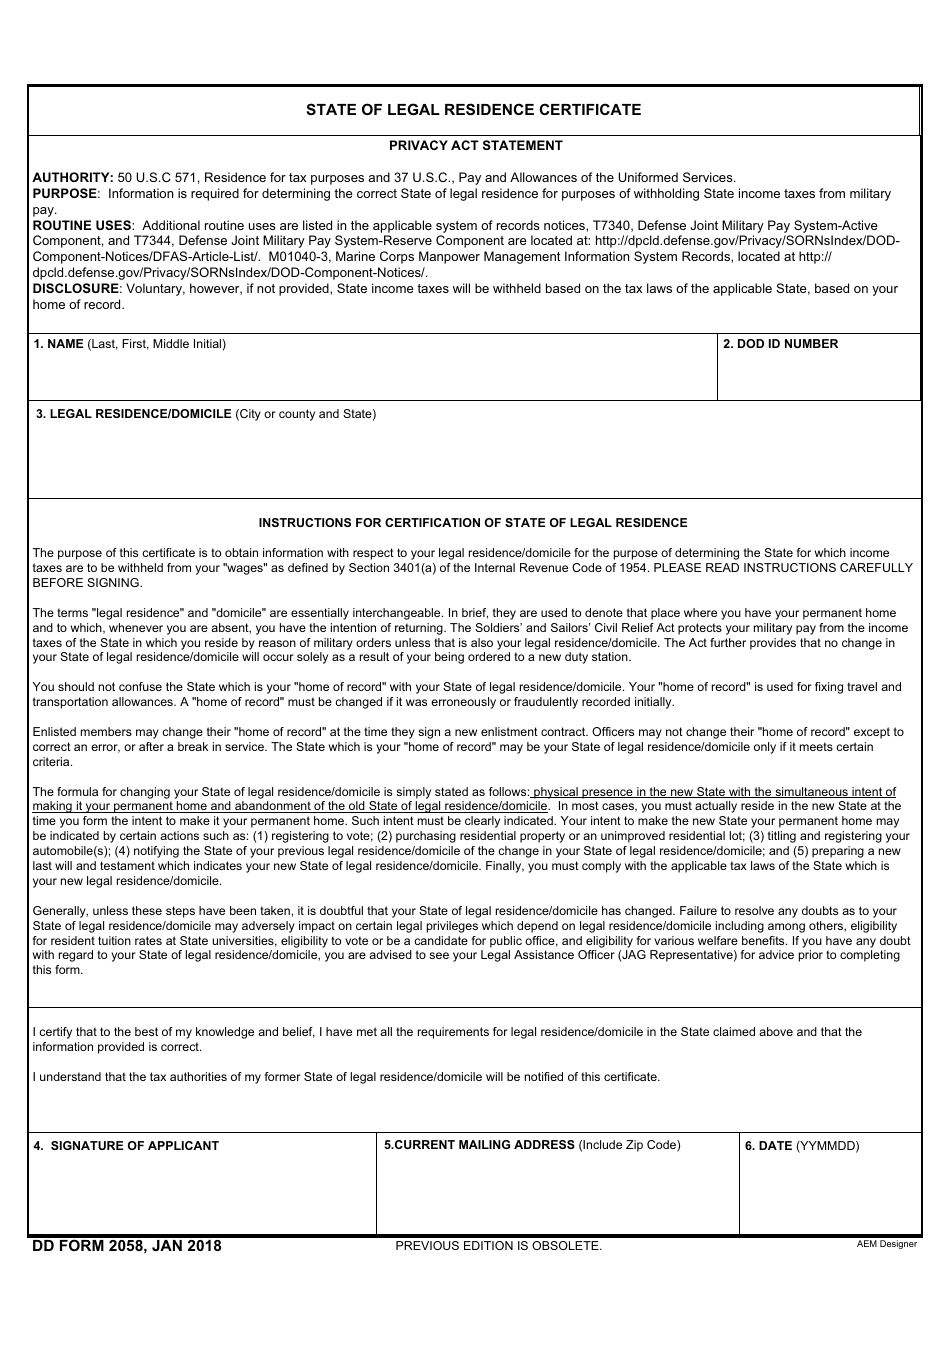 dd-form-2058-fill-out-sign-online-and-download-fillable-pdf